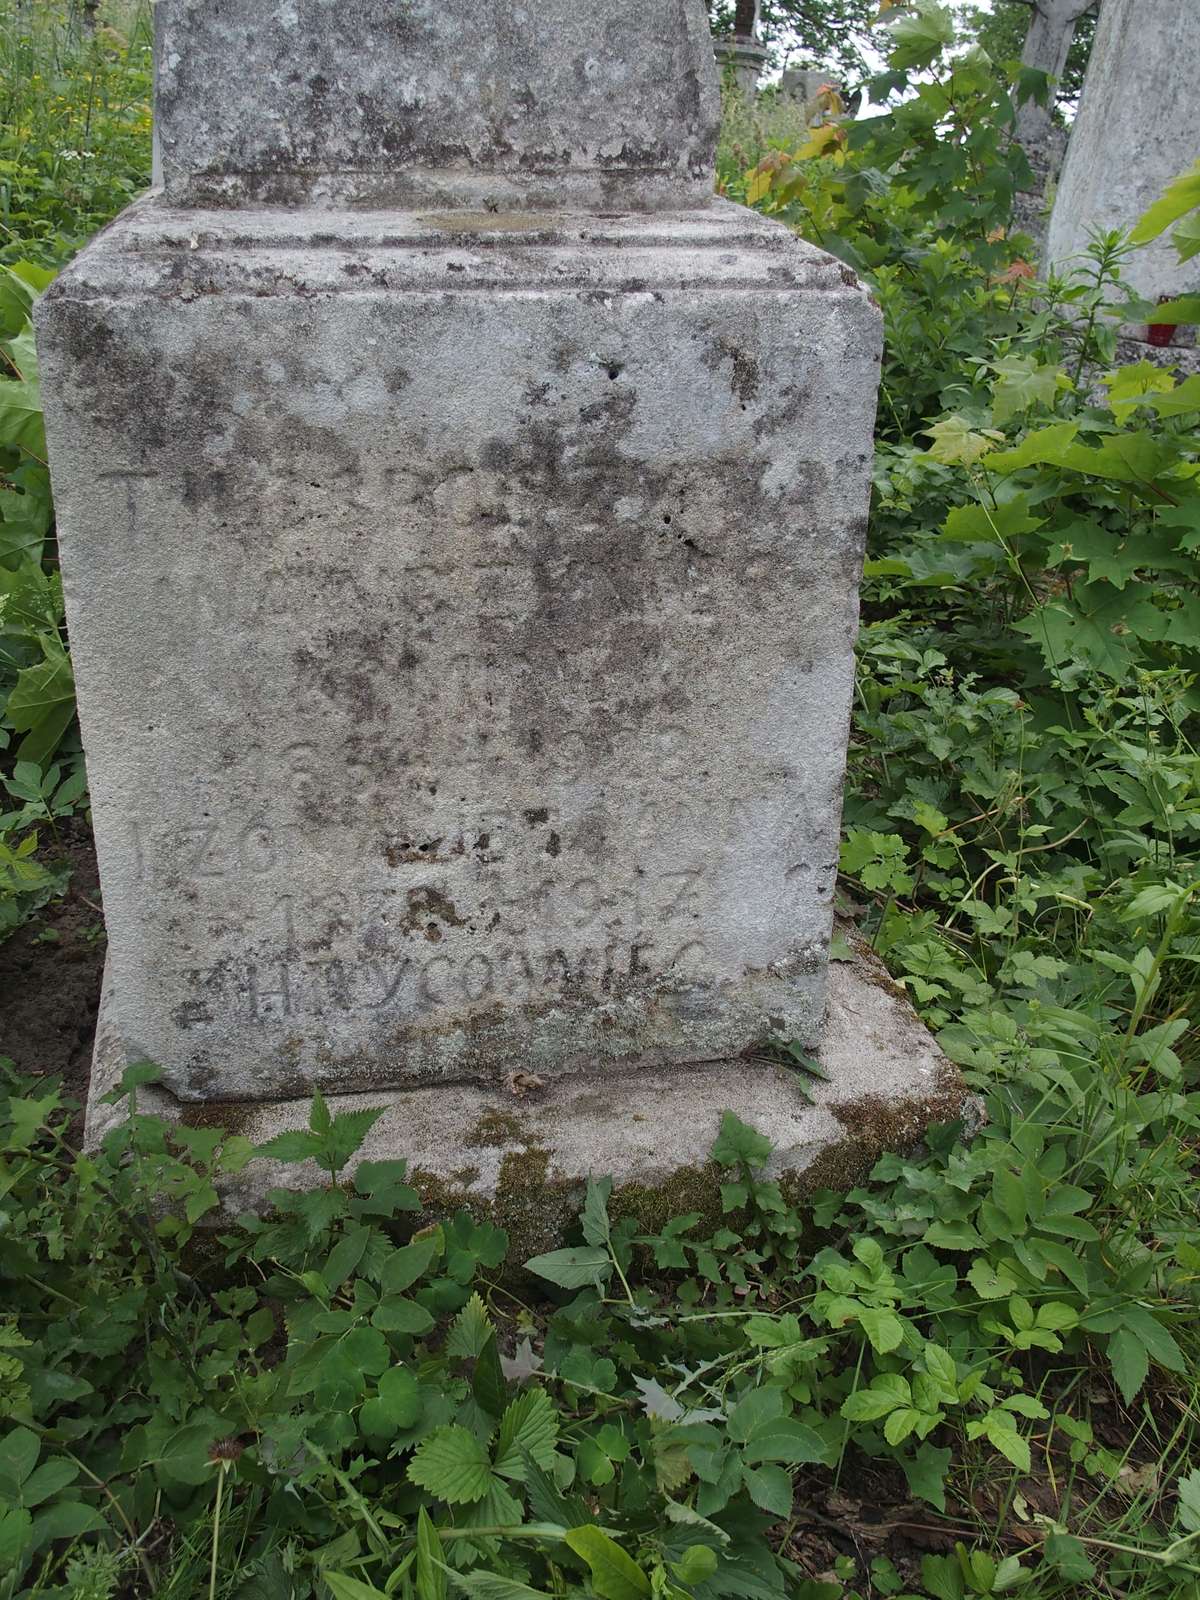 Tombstone of Lawrence and Anna Kominek, Zbarazh cemetery, as of 2018.